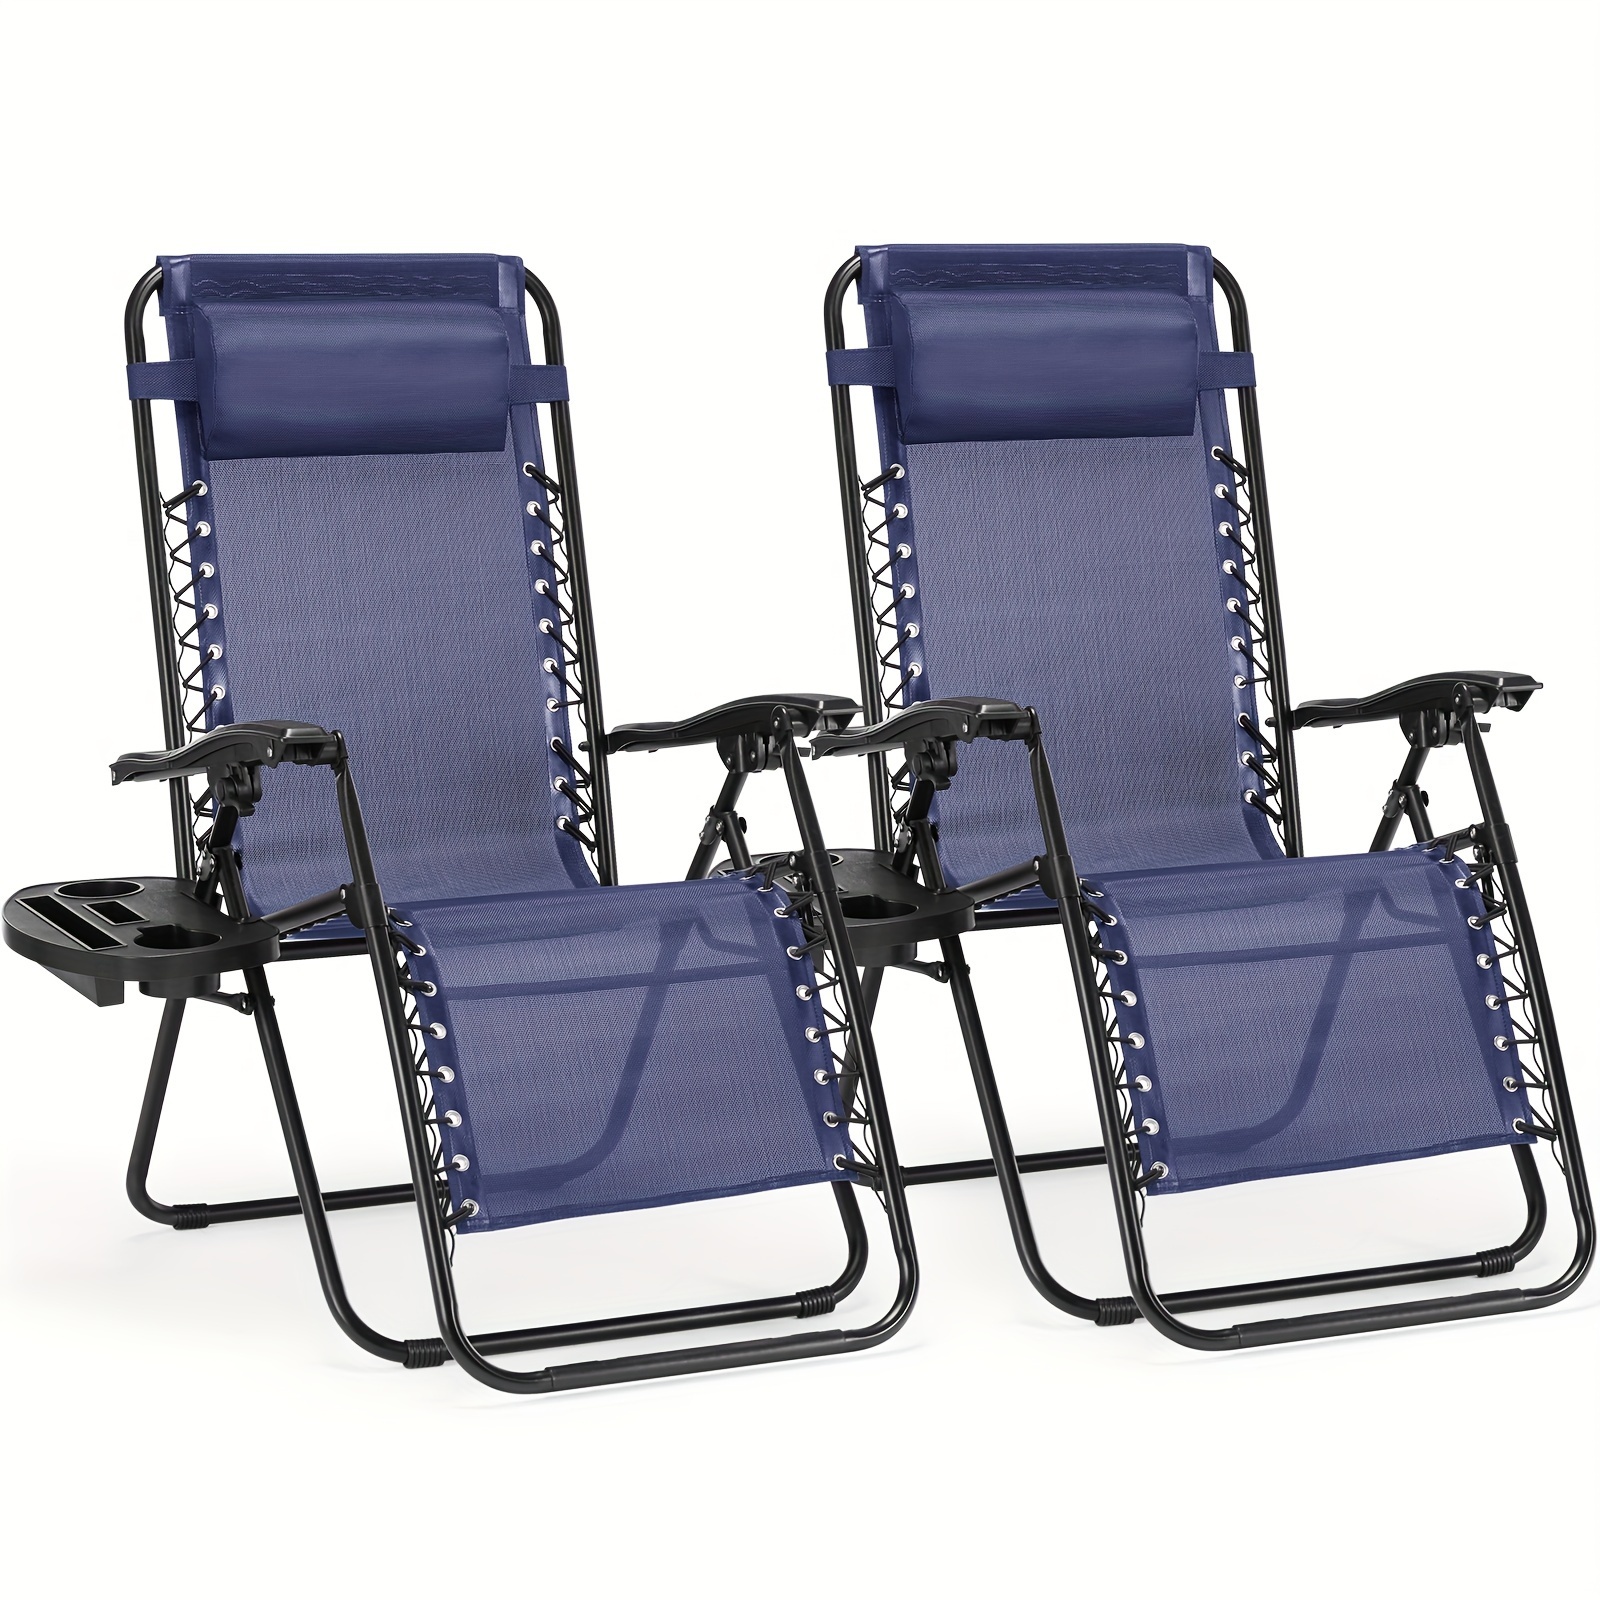 OLIXIS Zero   Set of 2, Patio Outdoor Folding Lounge Chair with Cup Holder Trays and Adjustable Pillow, Recliner Beach Camping Chairs for Poolside, Garden, Backyard, Lawn details 1